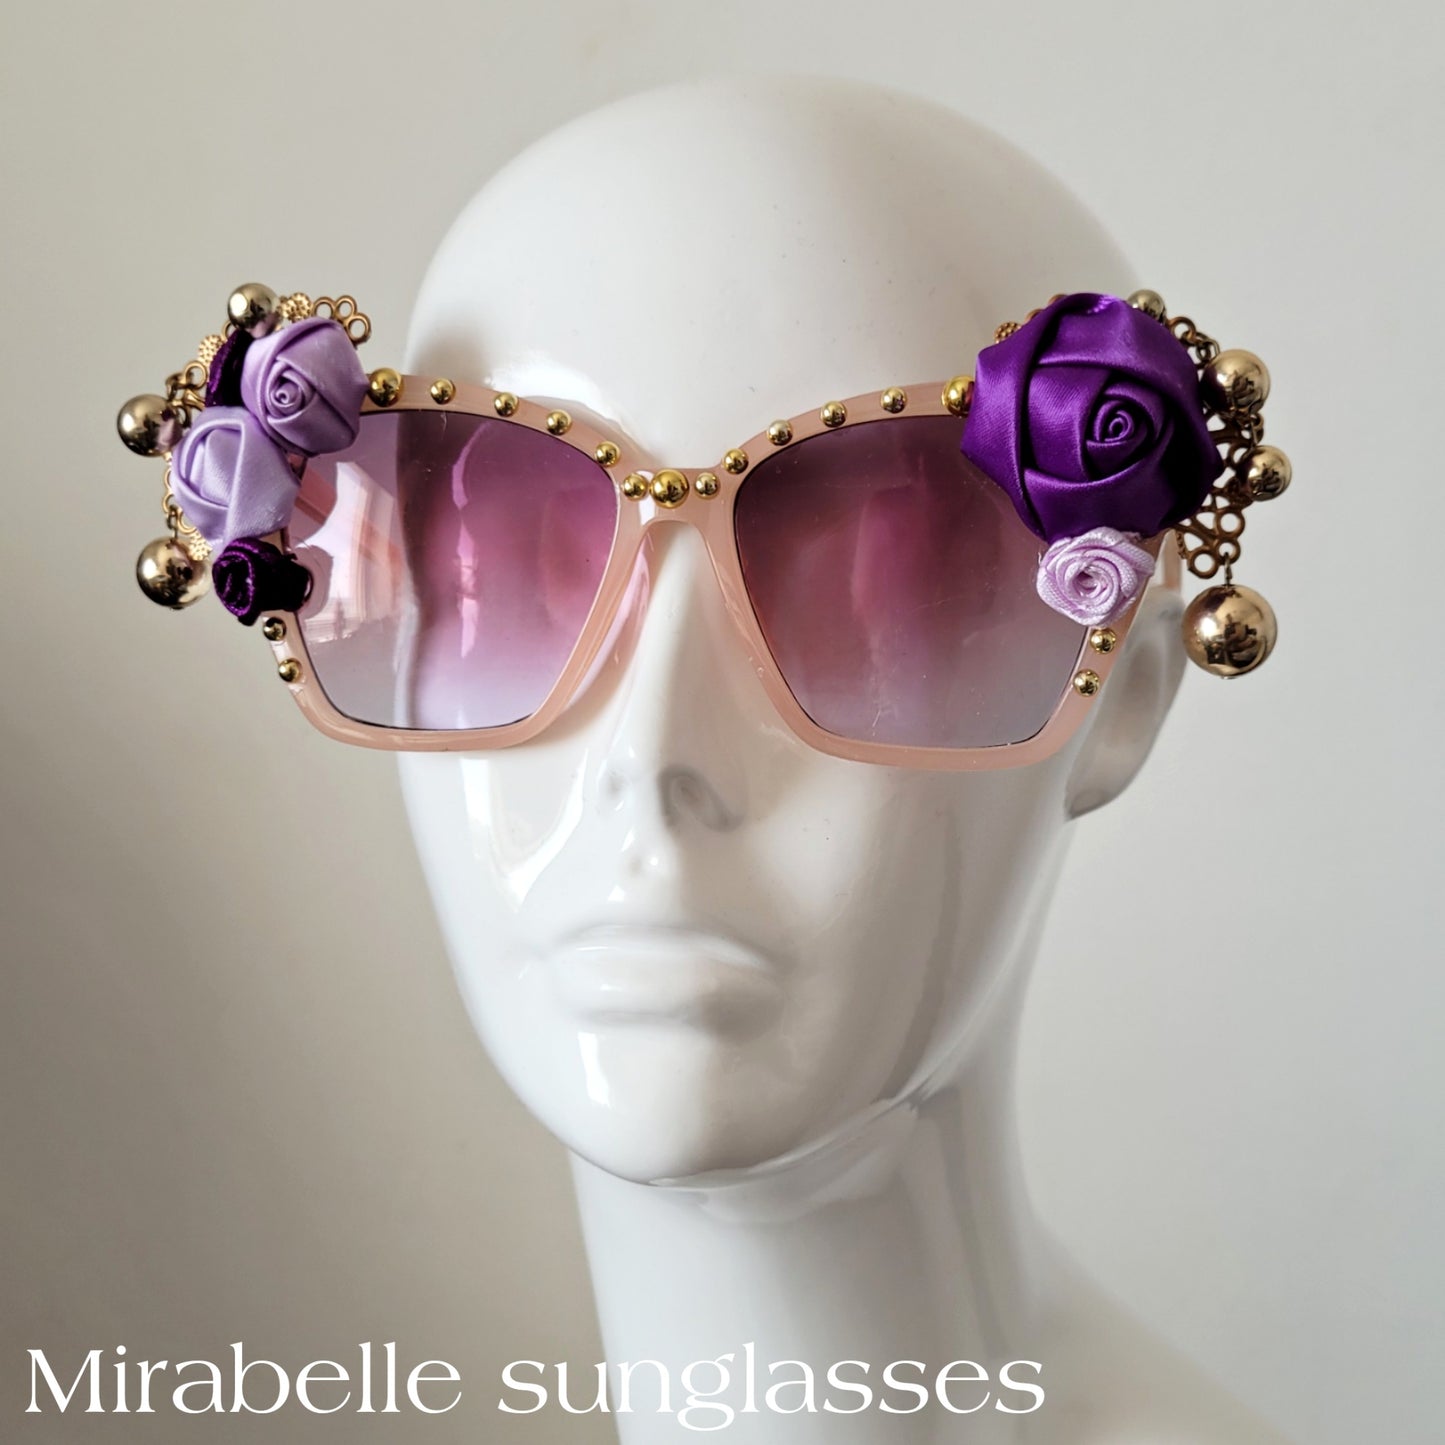 Á vallians coeurs riens impossible Collection: The Mirabelle sunglasses